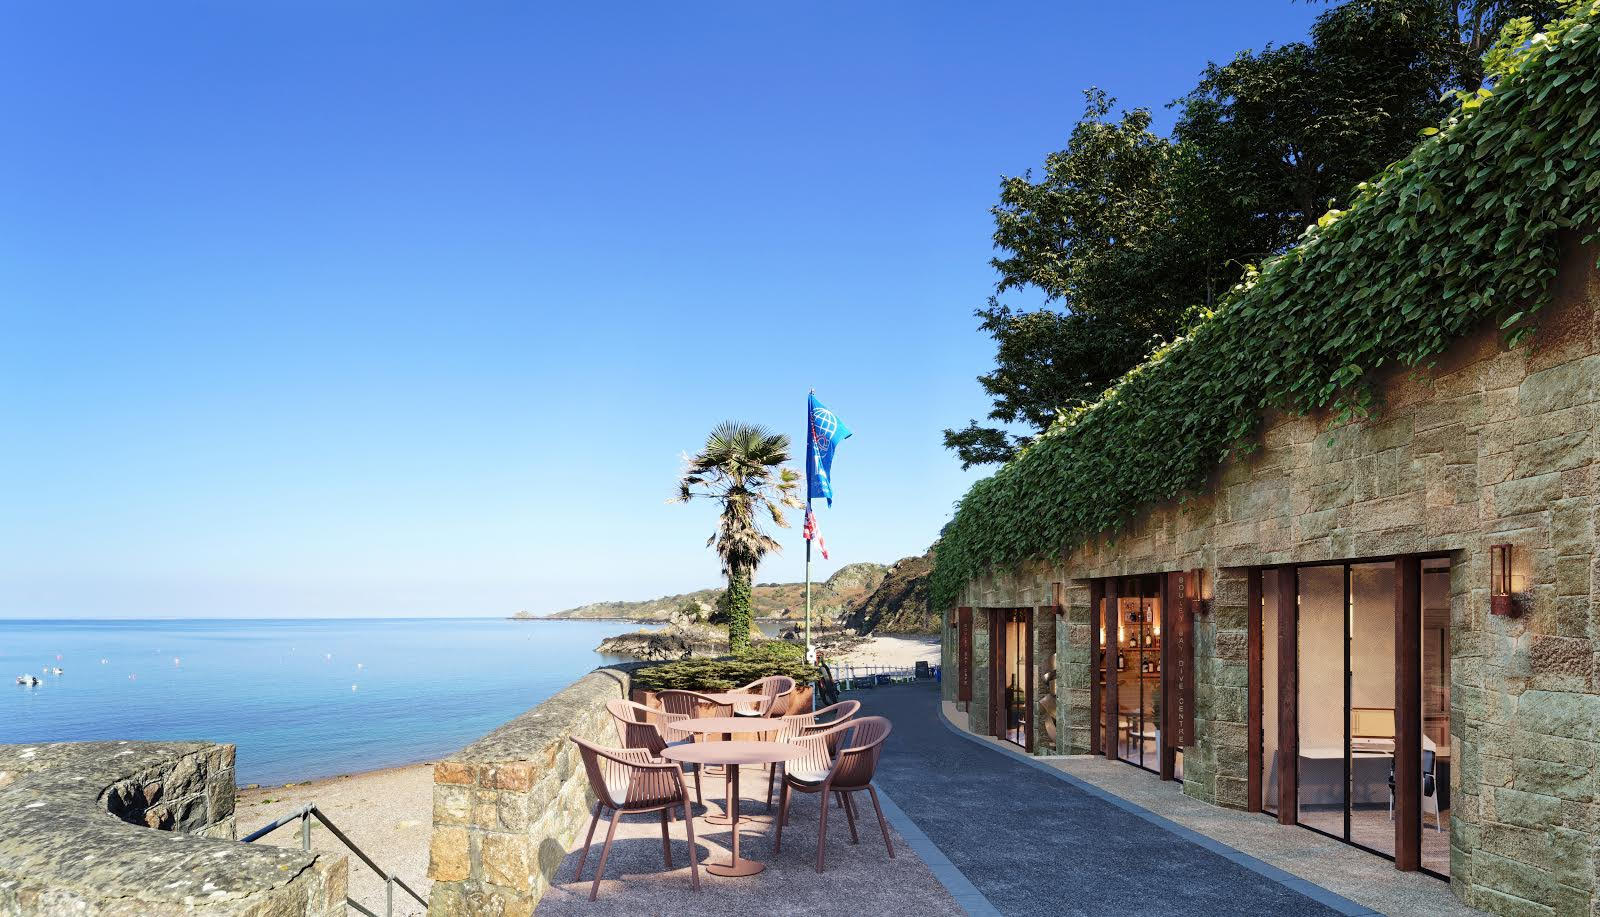 markering houder Staren Debate over controversial plans for Jersey's Bouley Bay hotel hots up | ITV  News Channel